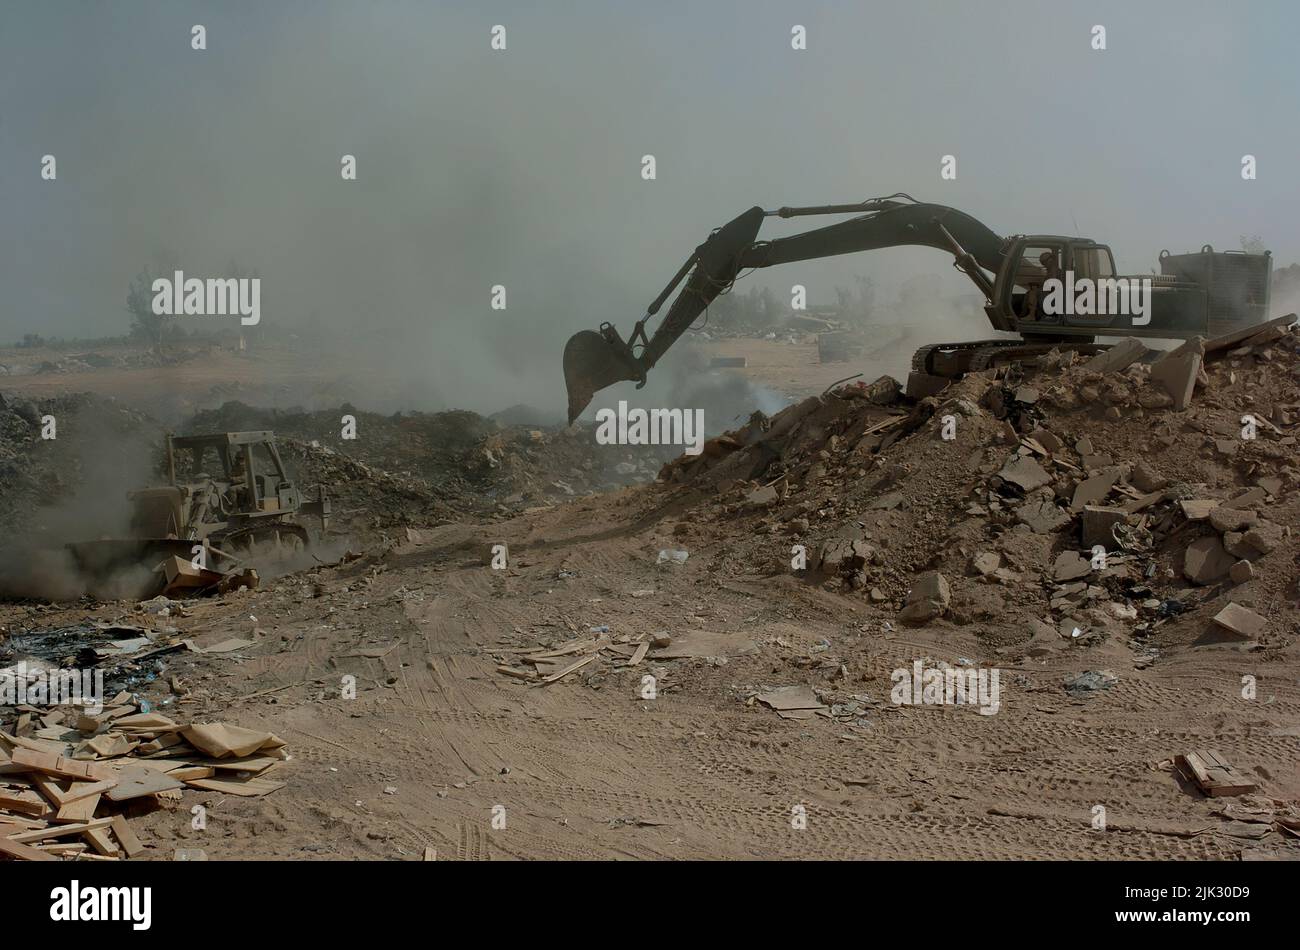 (LOGISTICS SUPPORT AREA ANACONDA, Balad, Iraq) - Soldiers from the 84th Combat Engineer Battalion use a bulldozer and excavator to maneuver trash and other burnable items around in the burn pit at the landfill here. The bulldozer is primarily used to keep refuse constantly burning, and the excavator to push dirt over chutes to make the land useable in the future. Stock Photo